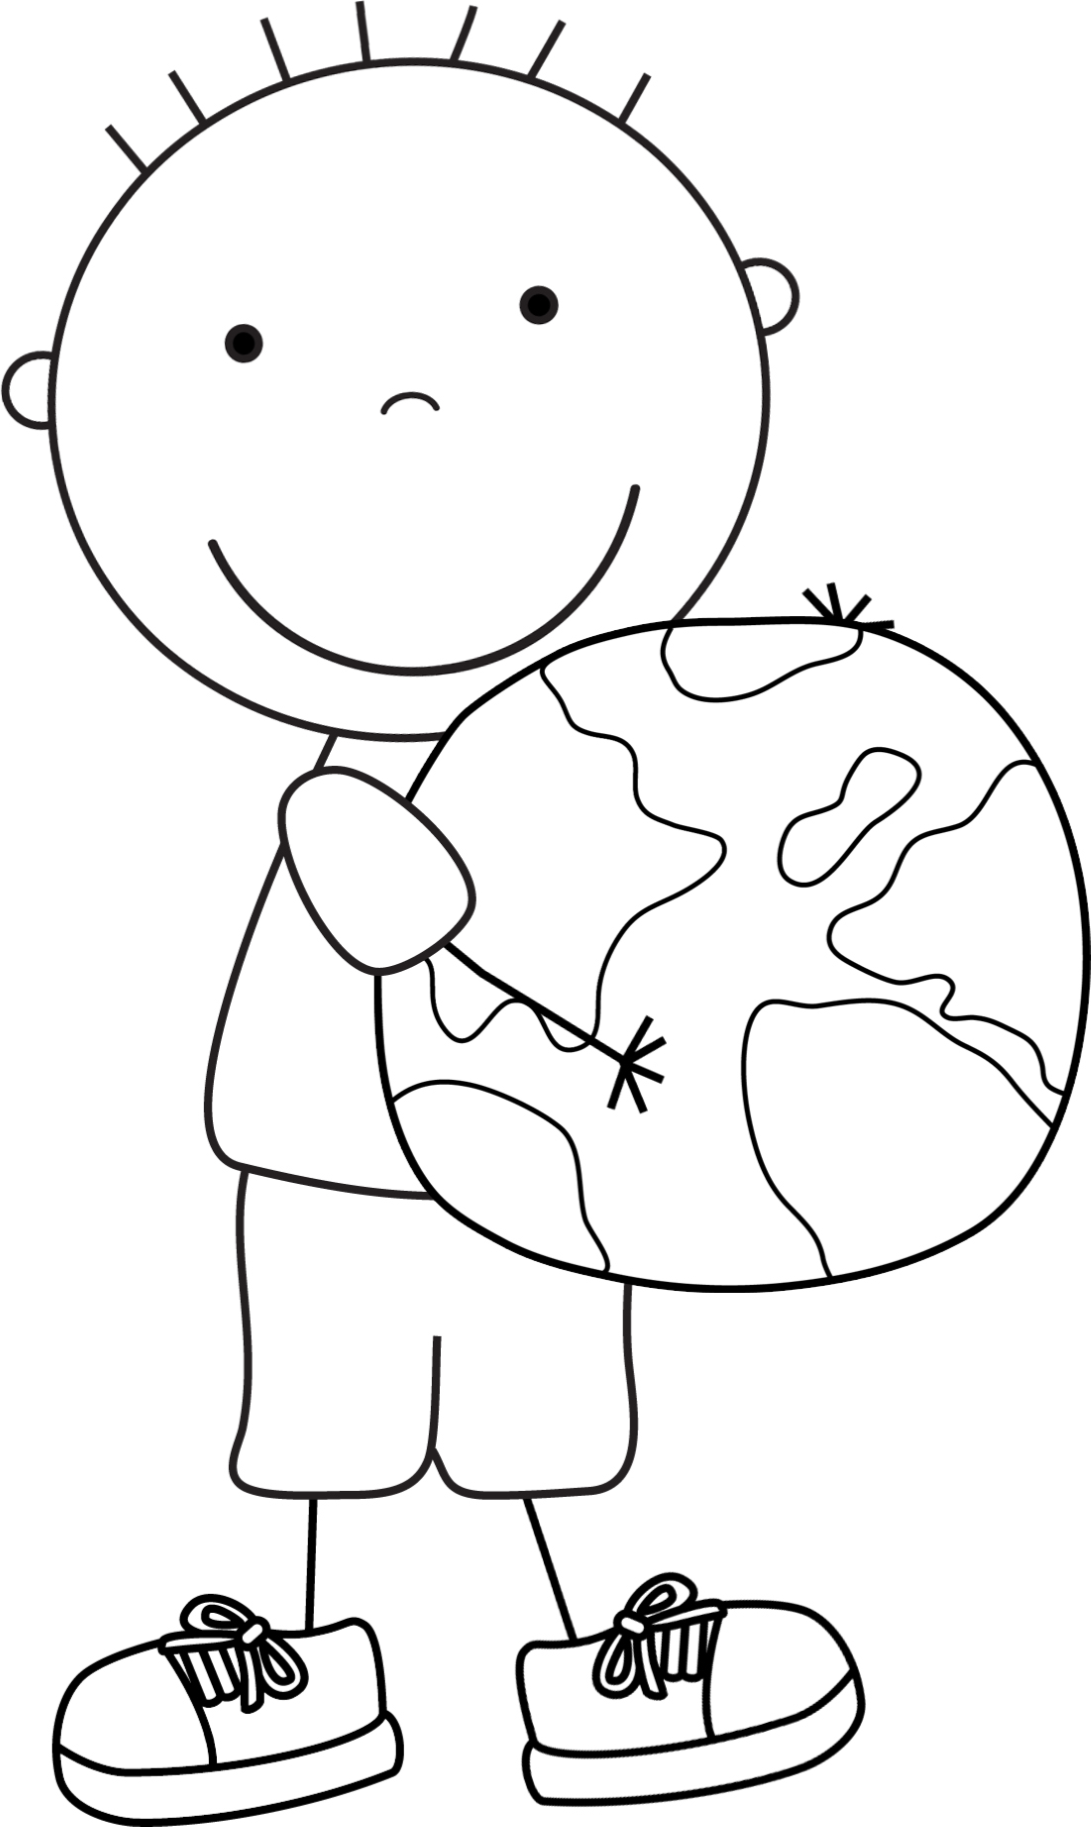 Kid color pages earth day for boys